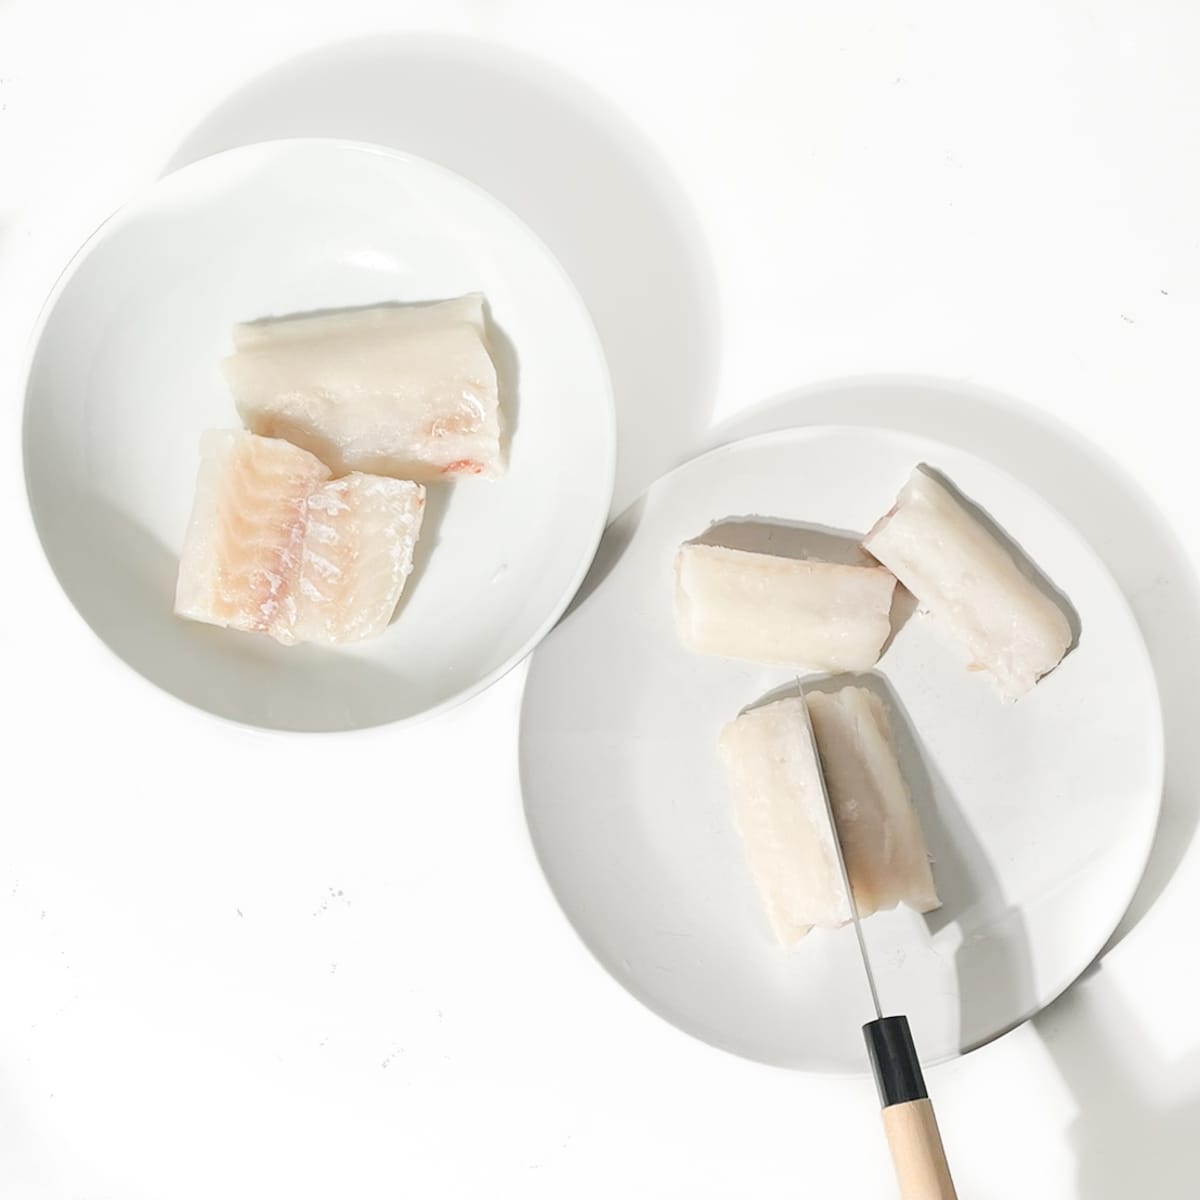 Cutting the fish fillets lengthways on a white plate.